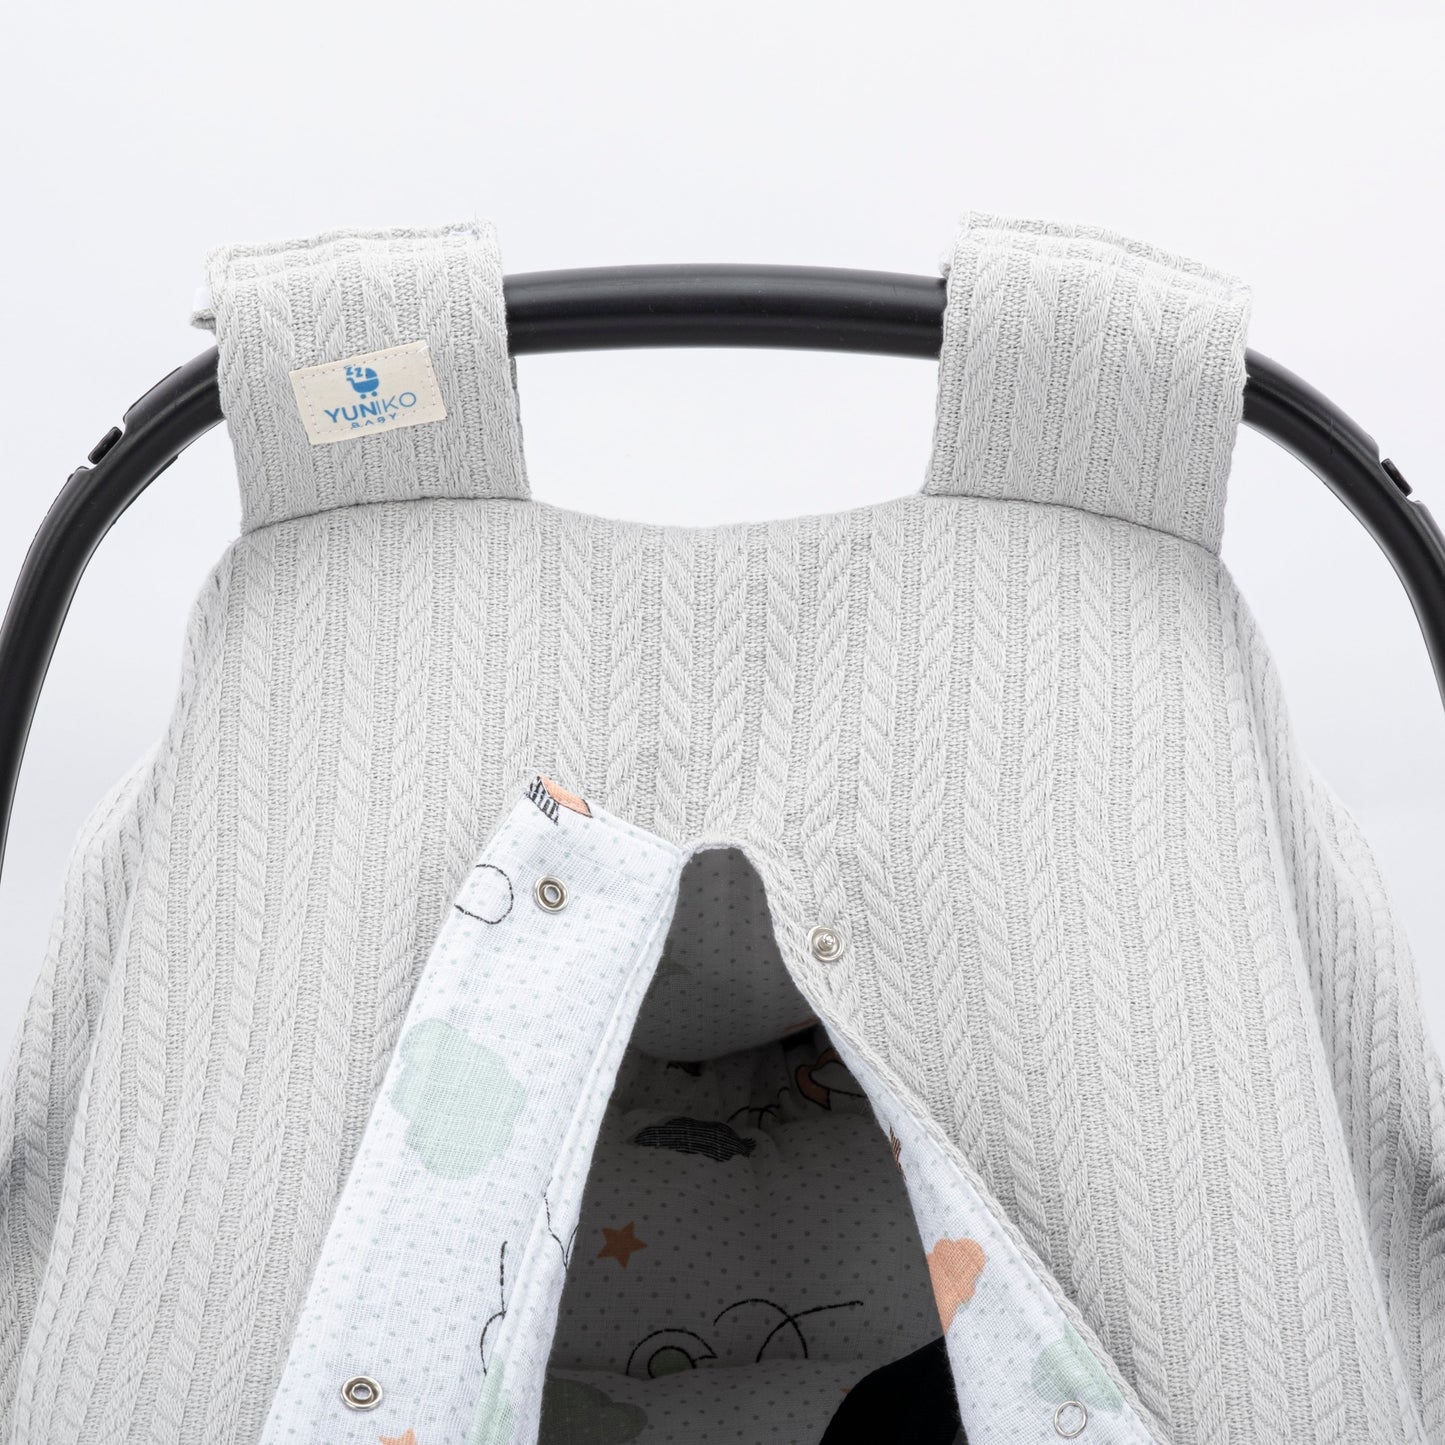 Stroller Cover Set - Double Side - Gray Knit - Birds